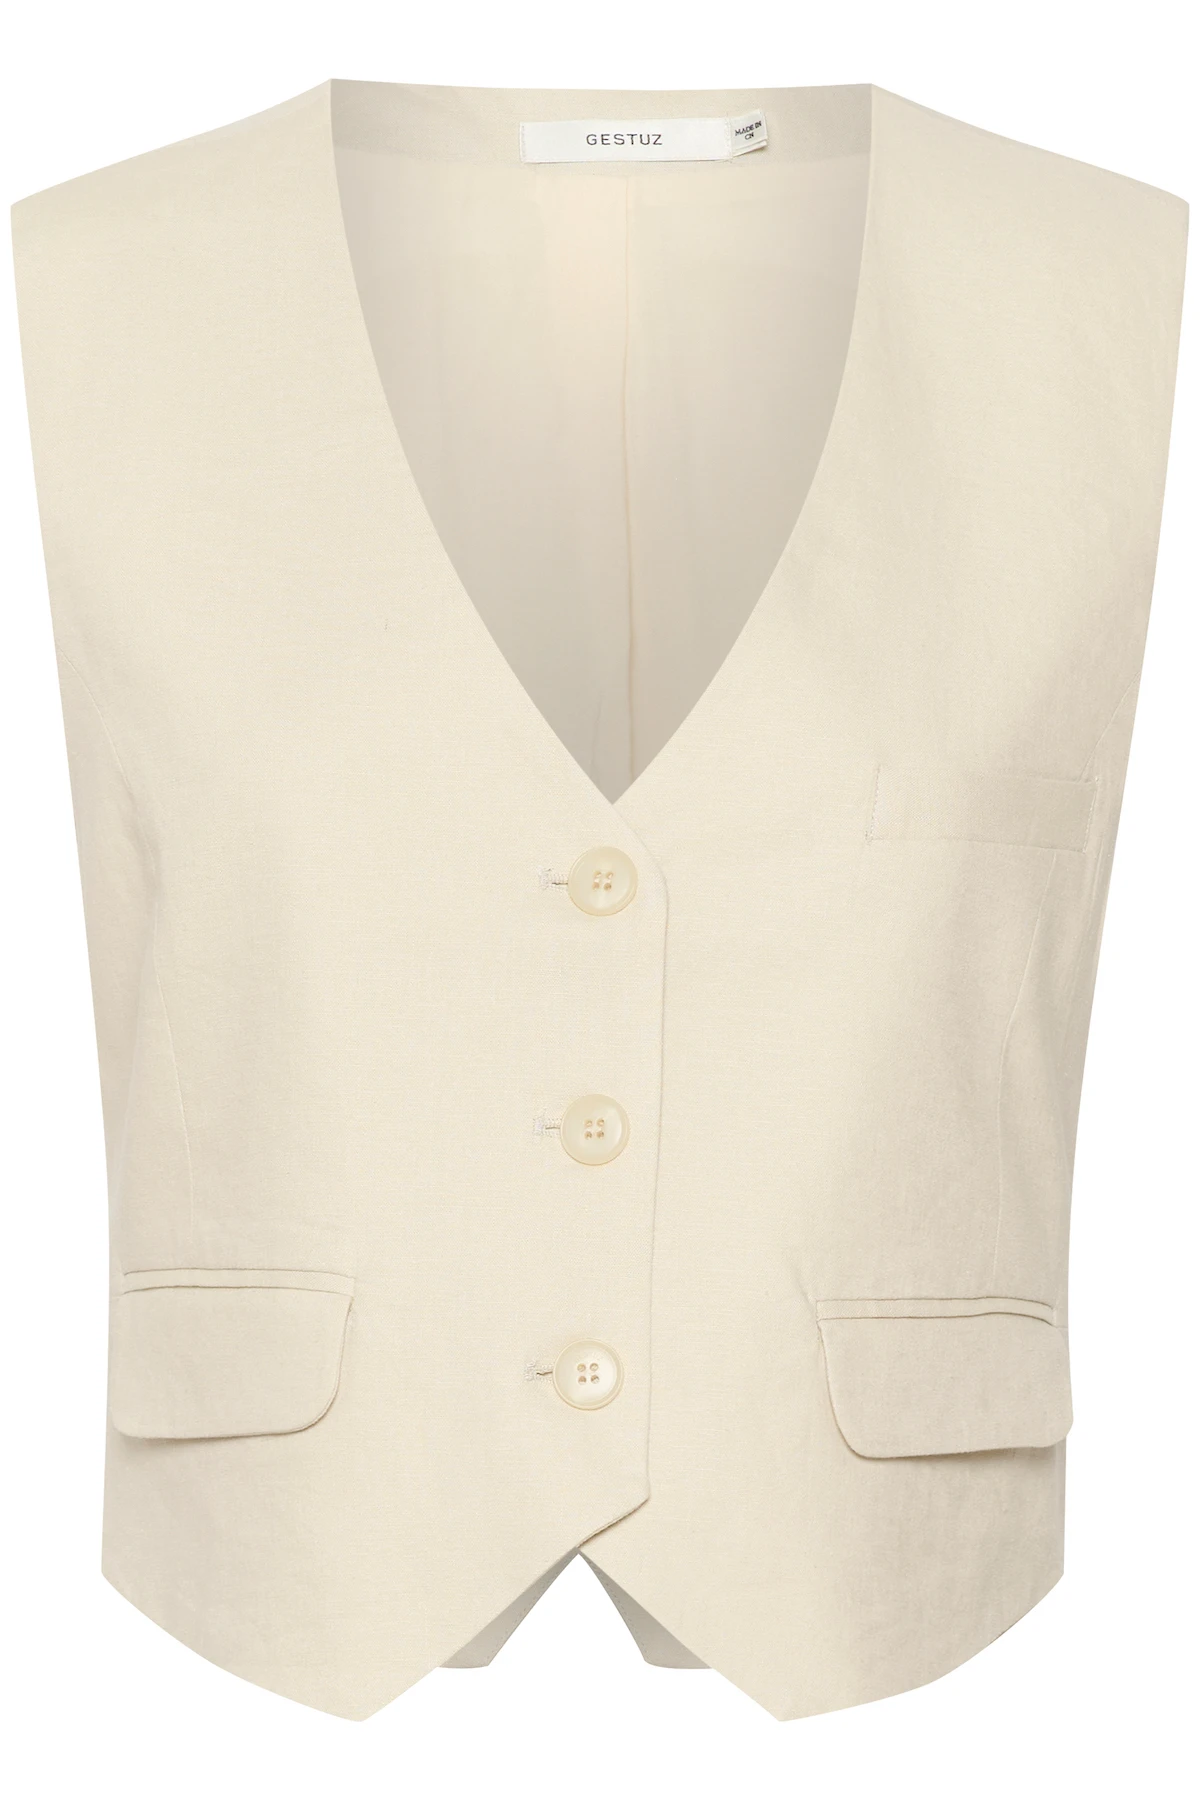 Waistcoats for women - Save up to 50% - Big selection - Buy here